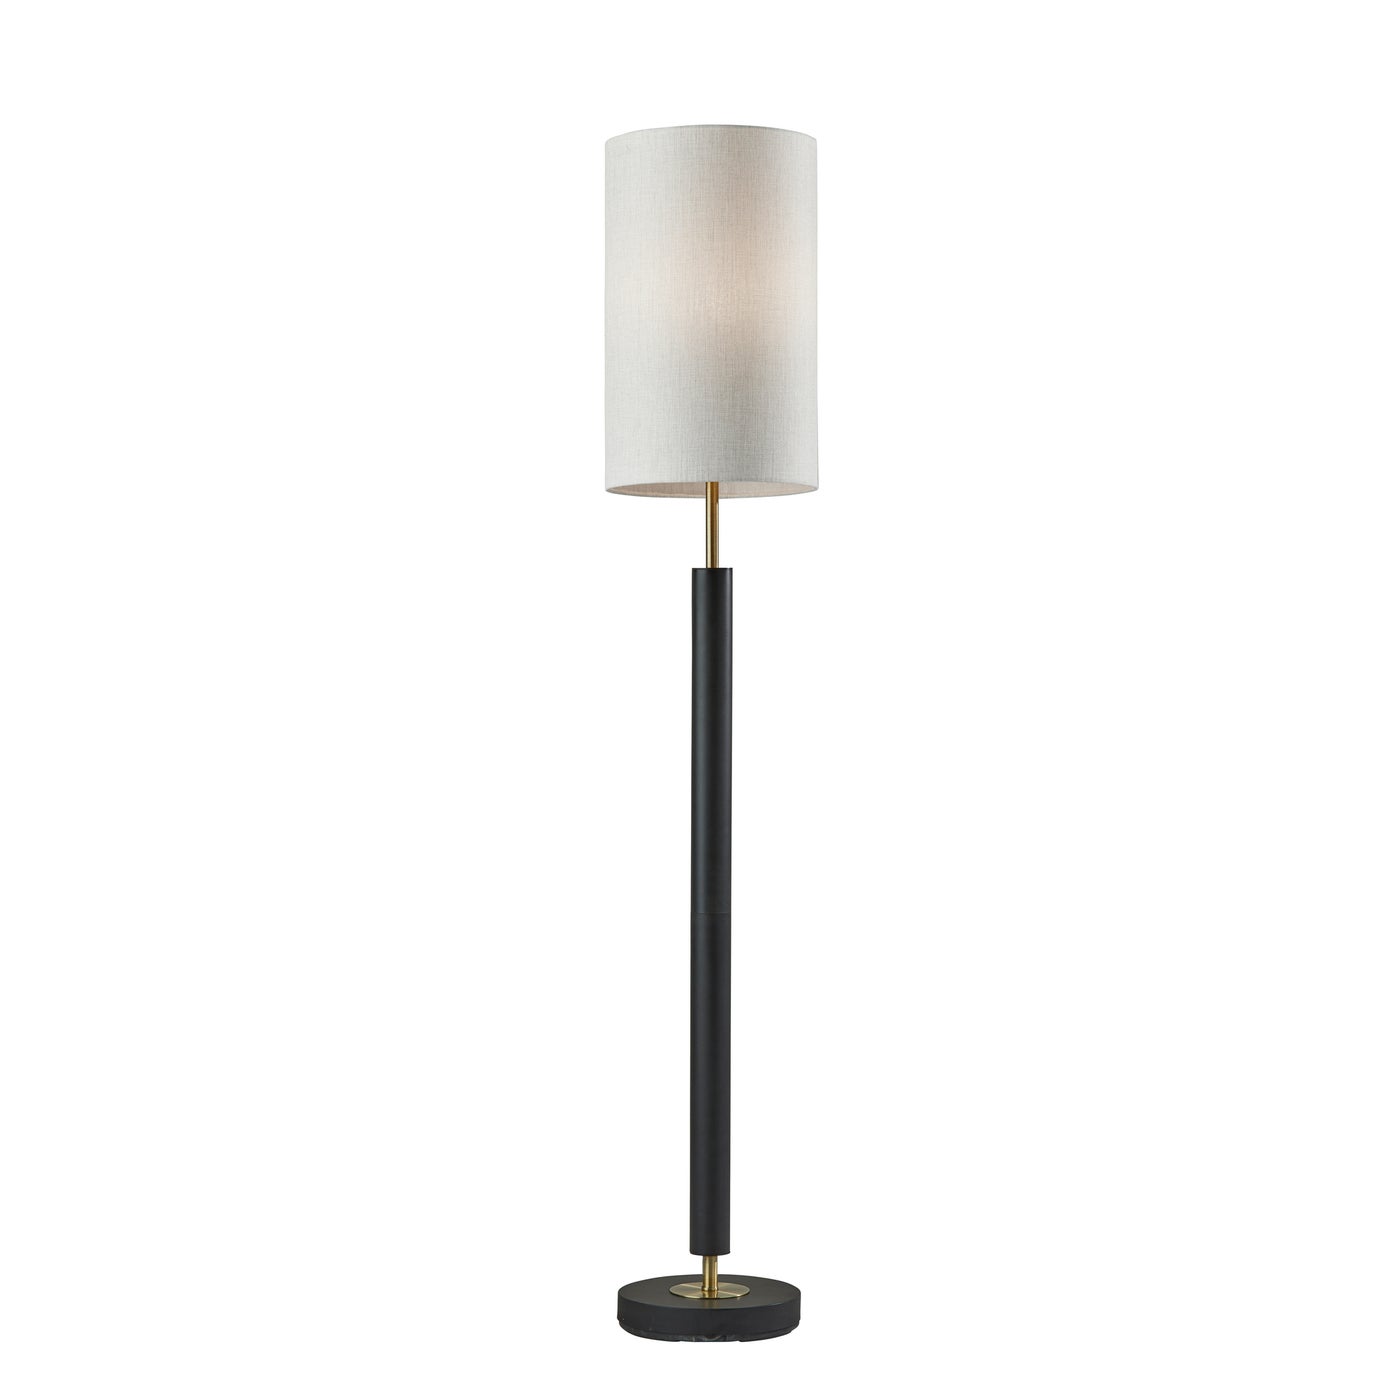 Adesso Home - 4174-01 - Floor Lamp - Hollywood - Black W. Antique Brass Accents